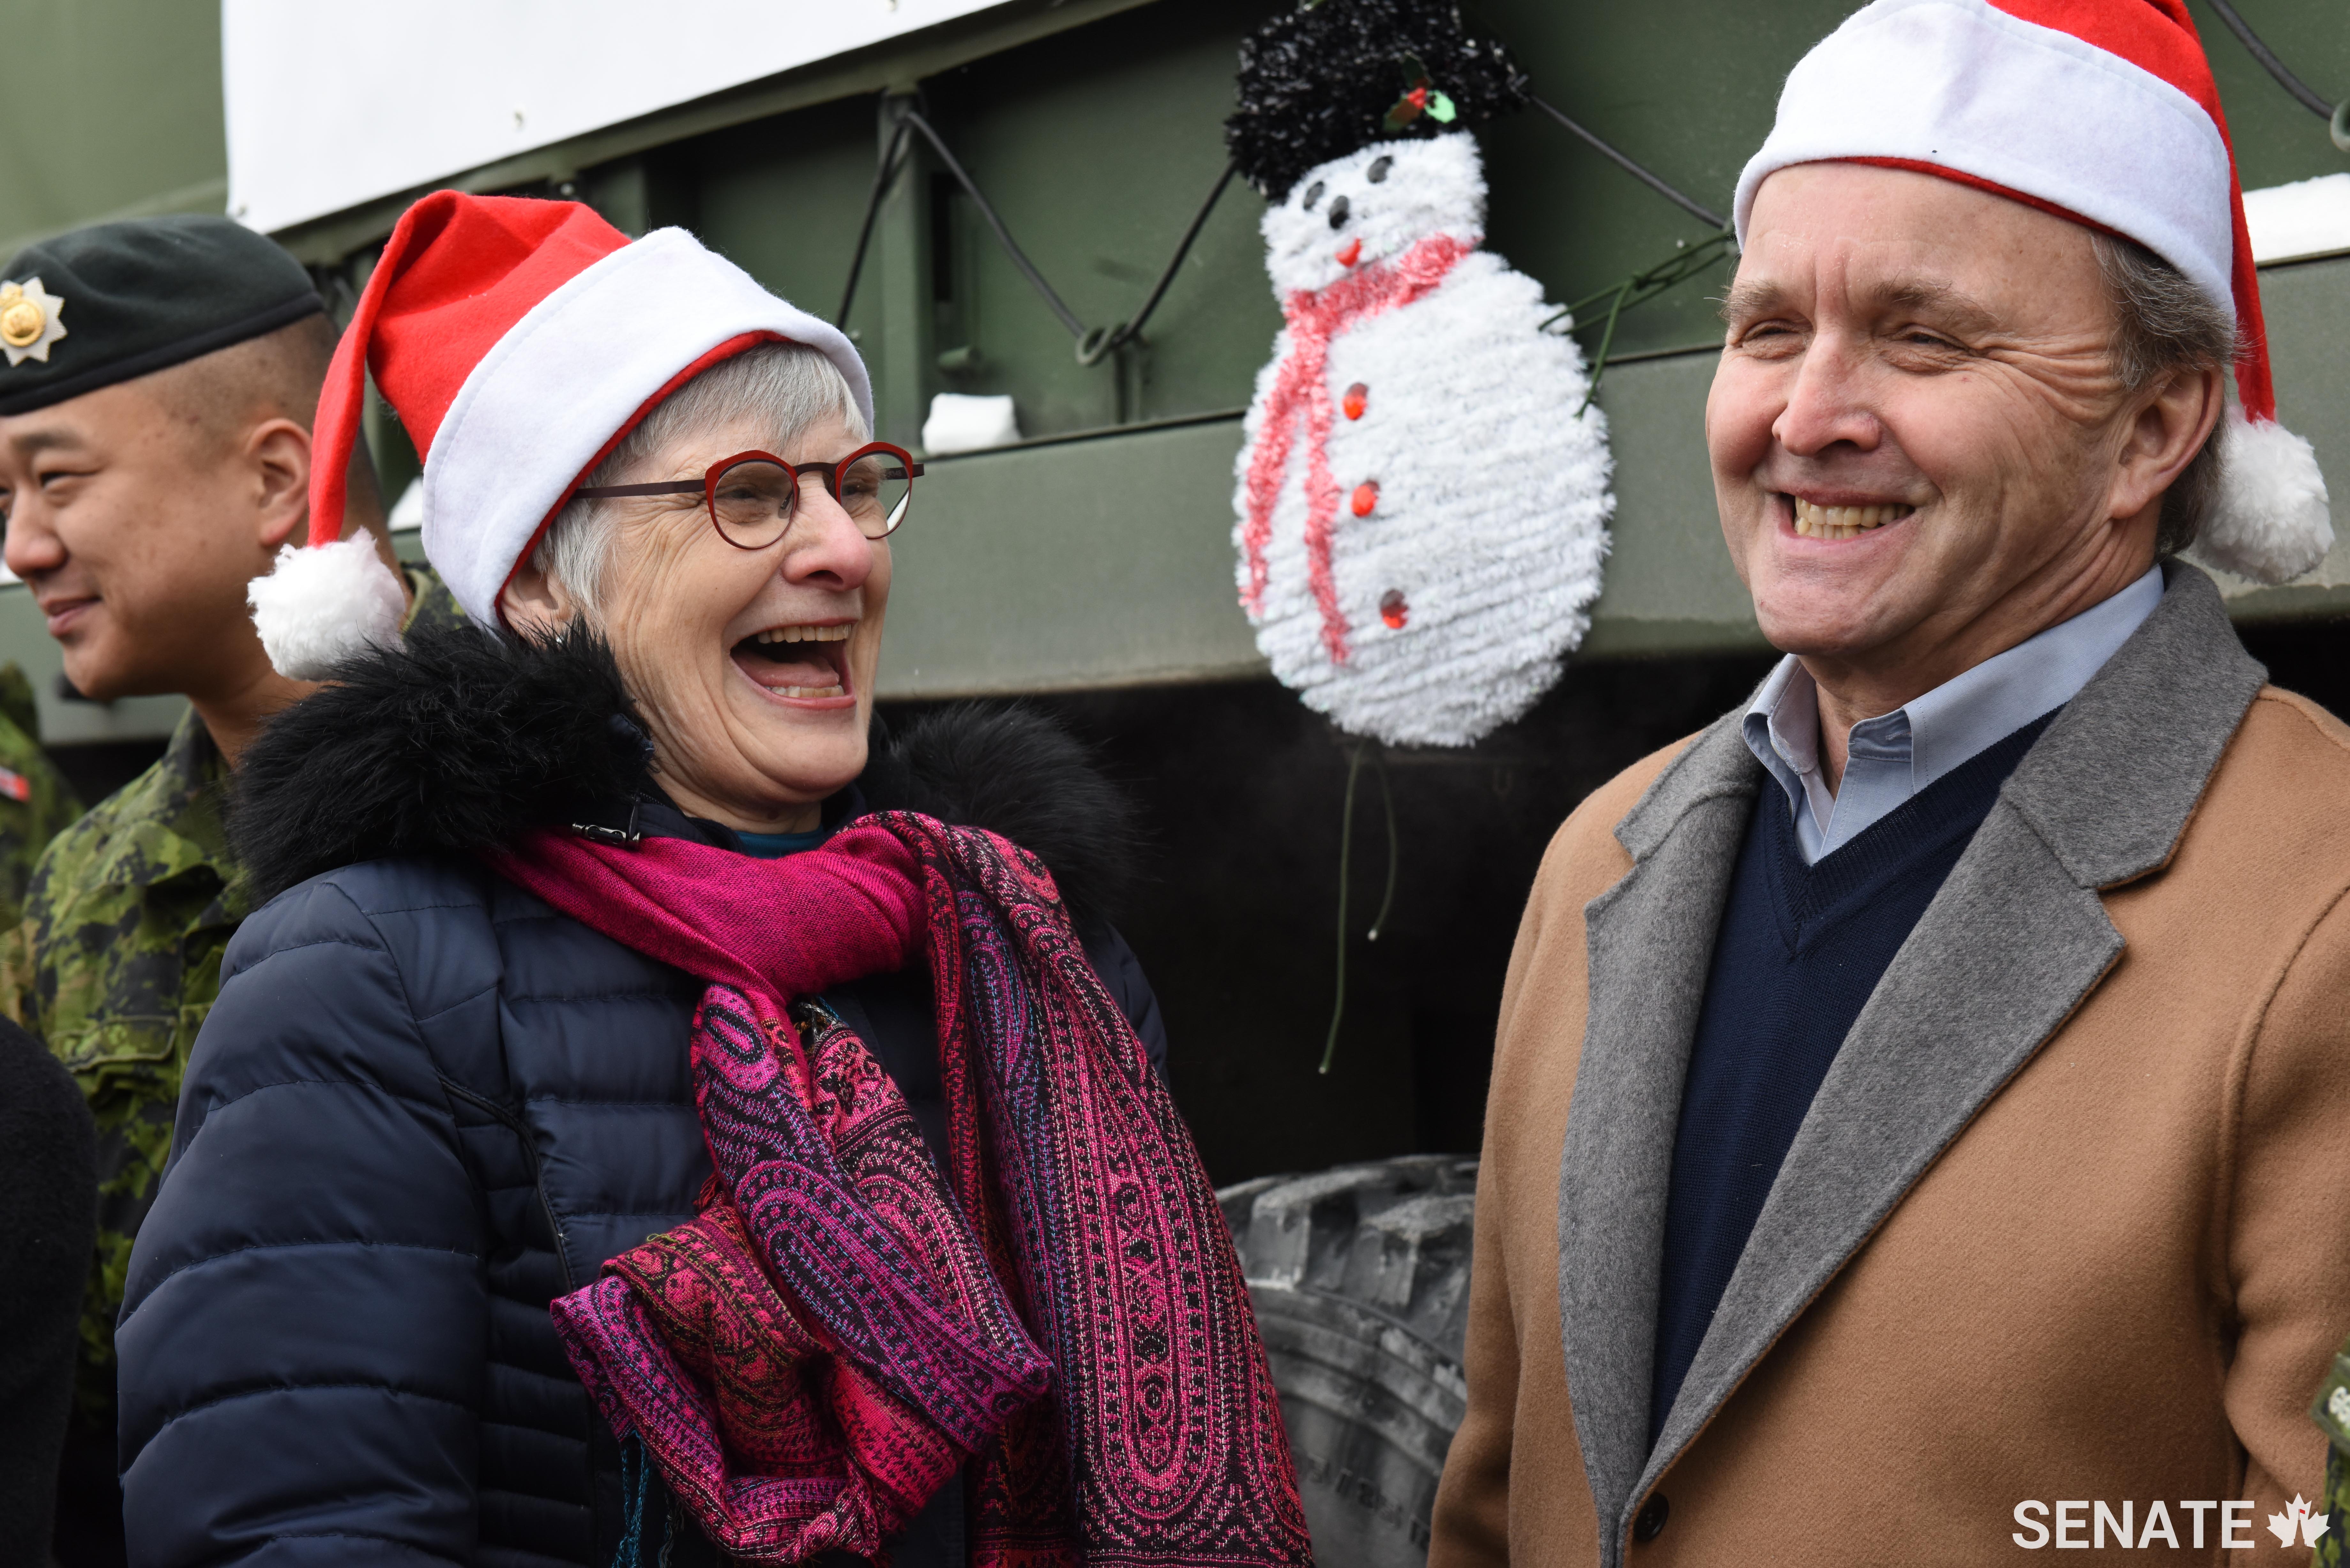 Senators Patricia Bovey and Grant Mitchell share a laugh during the Toys for Tots collection on Friday, December 15, 2017.